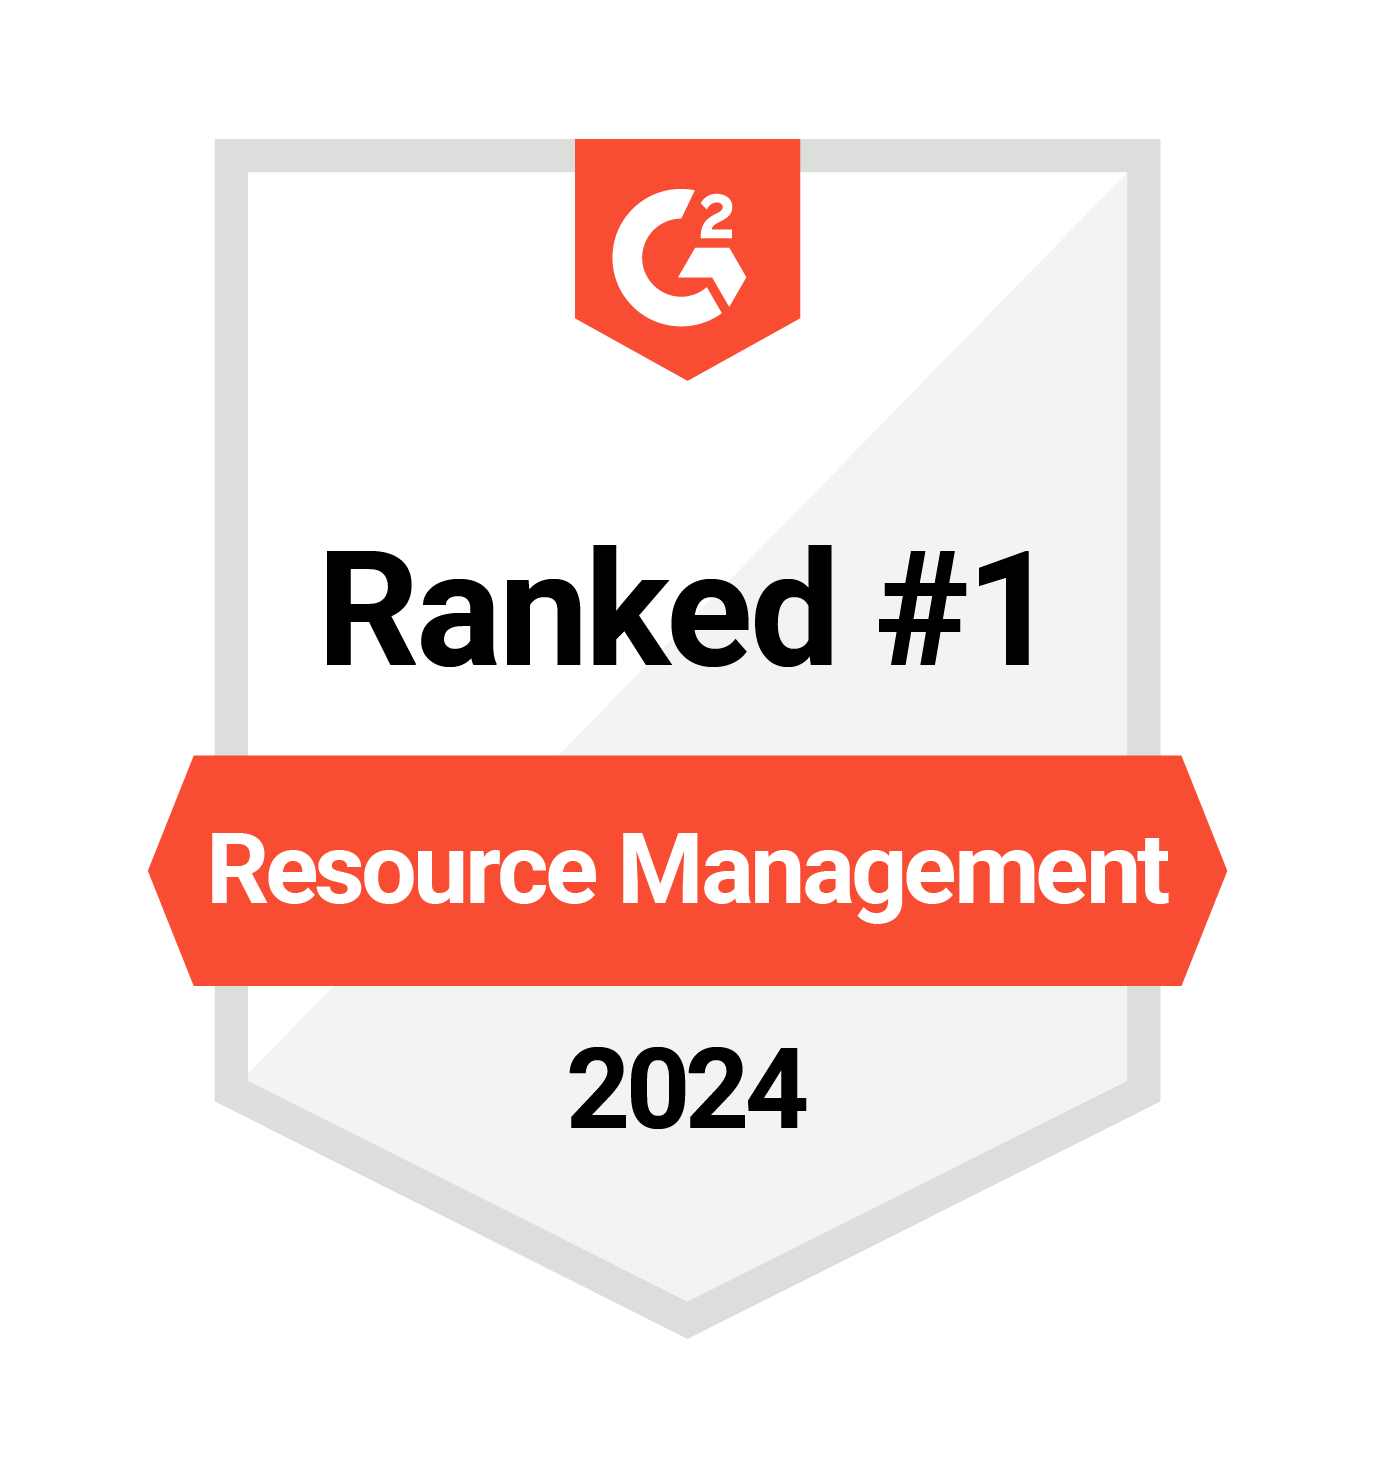 G2 Ranked #1 in Resource Management